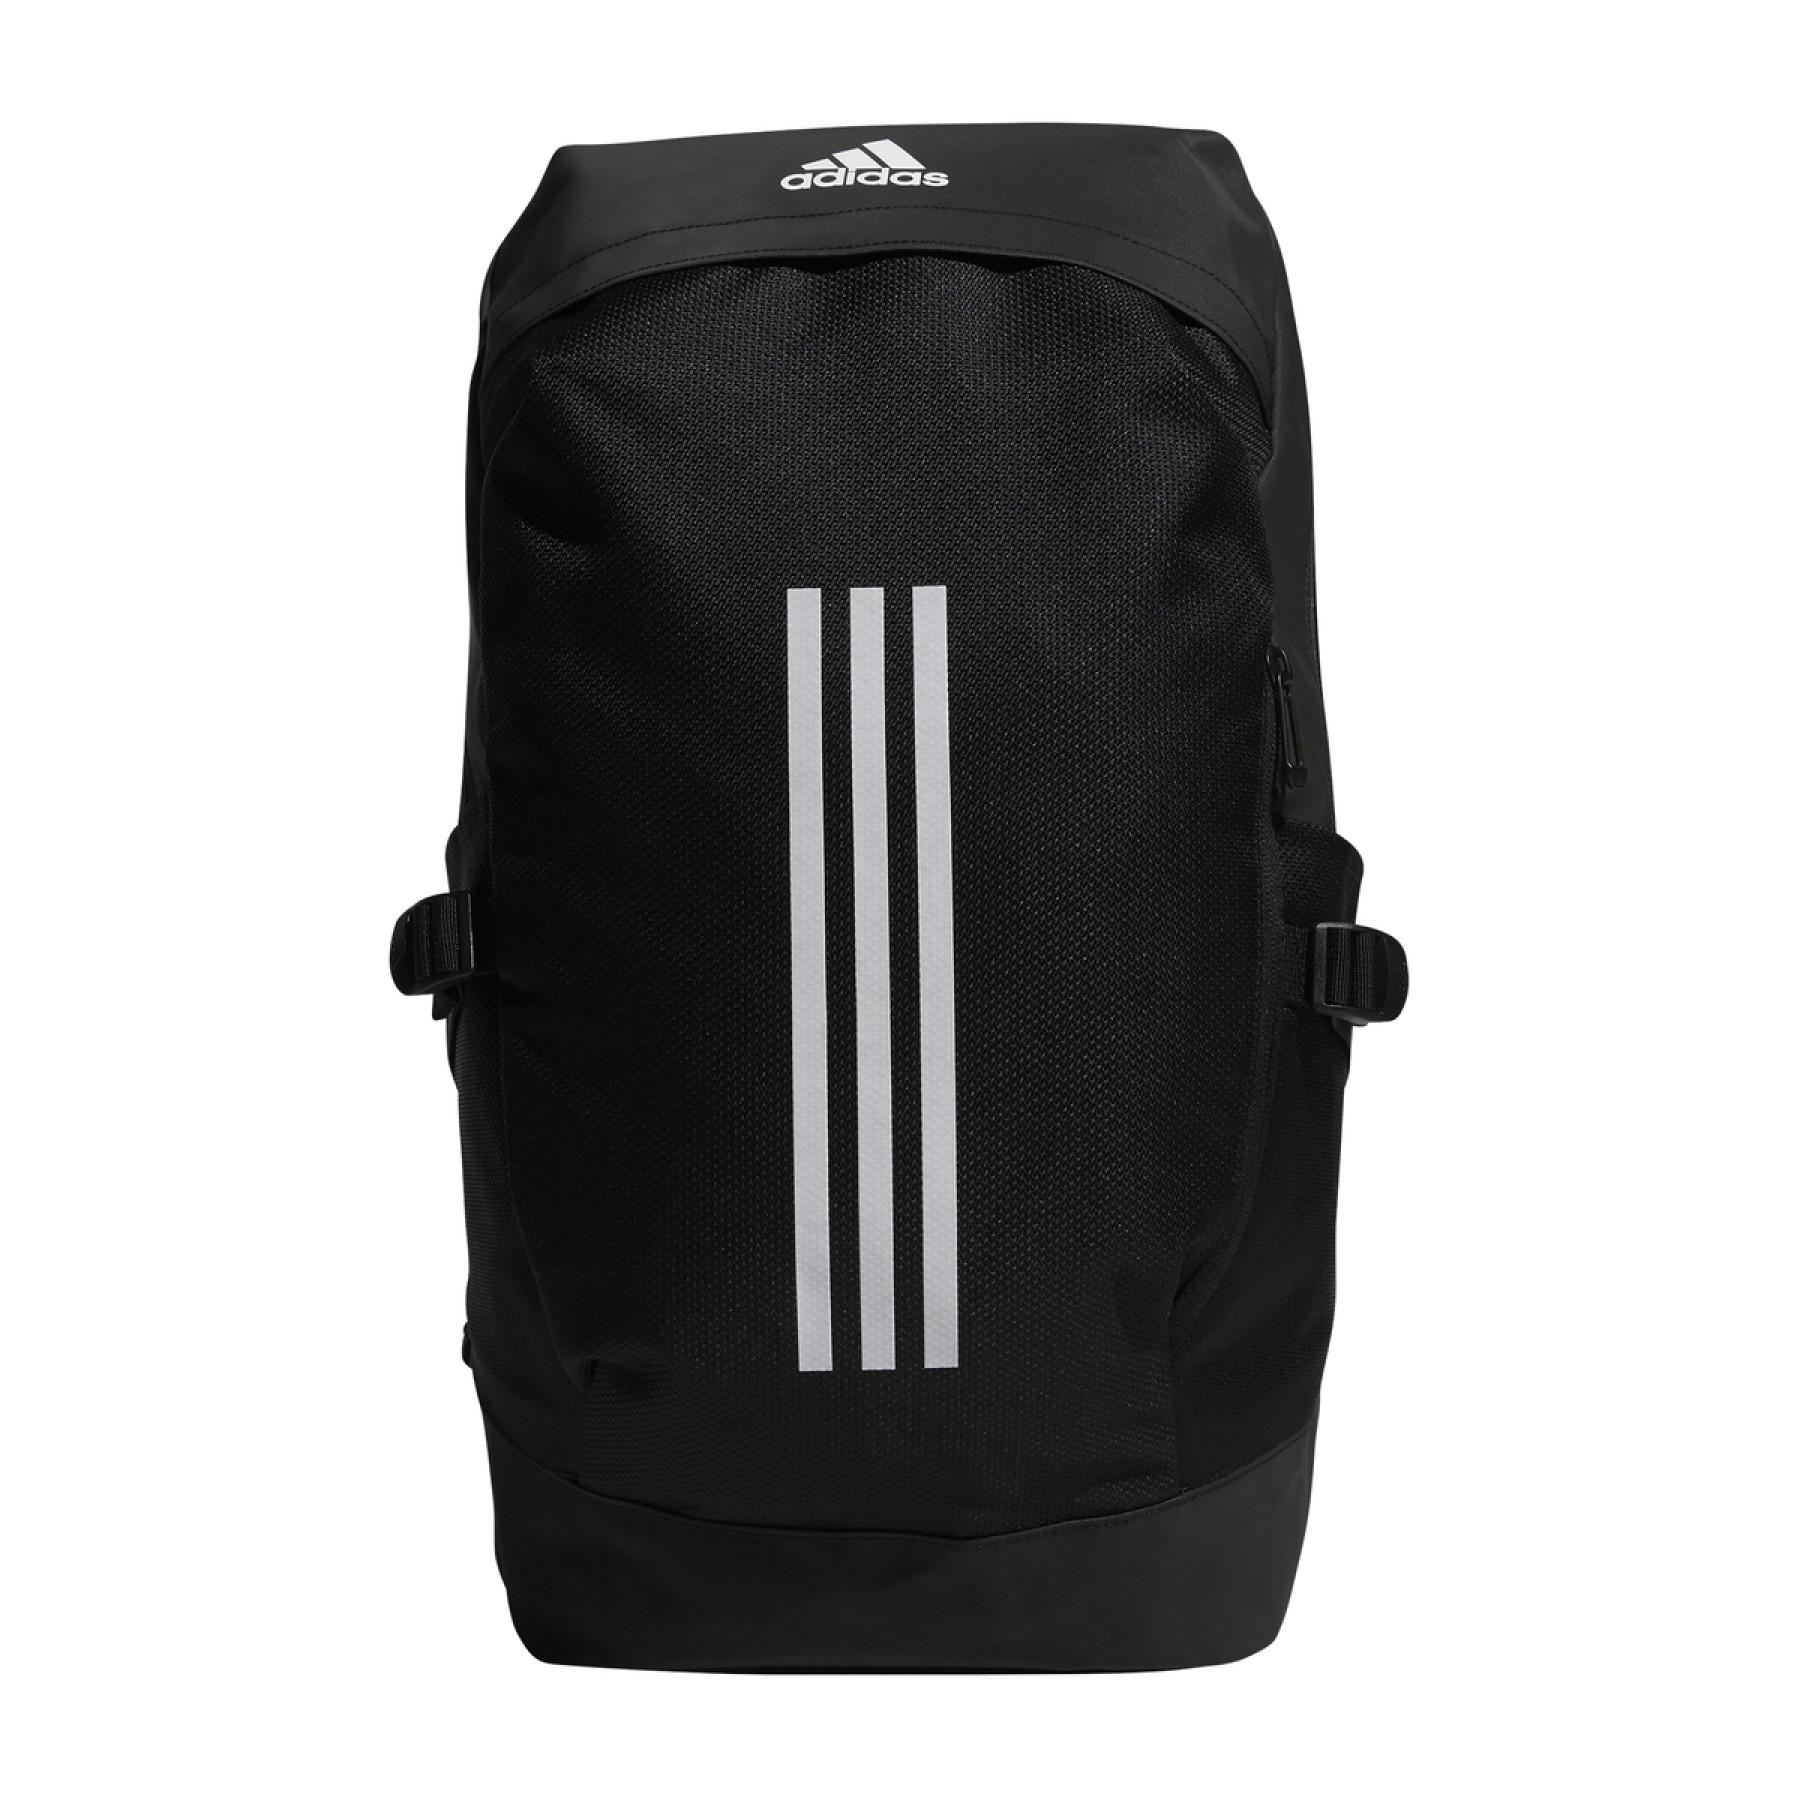 Backpack adidas Endurance Packing System 30